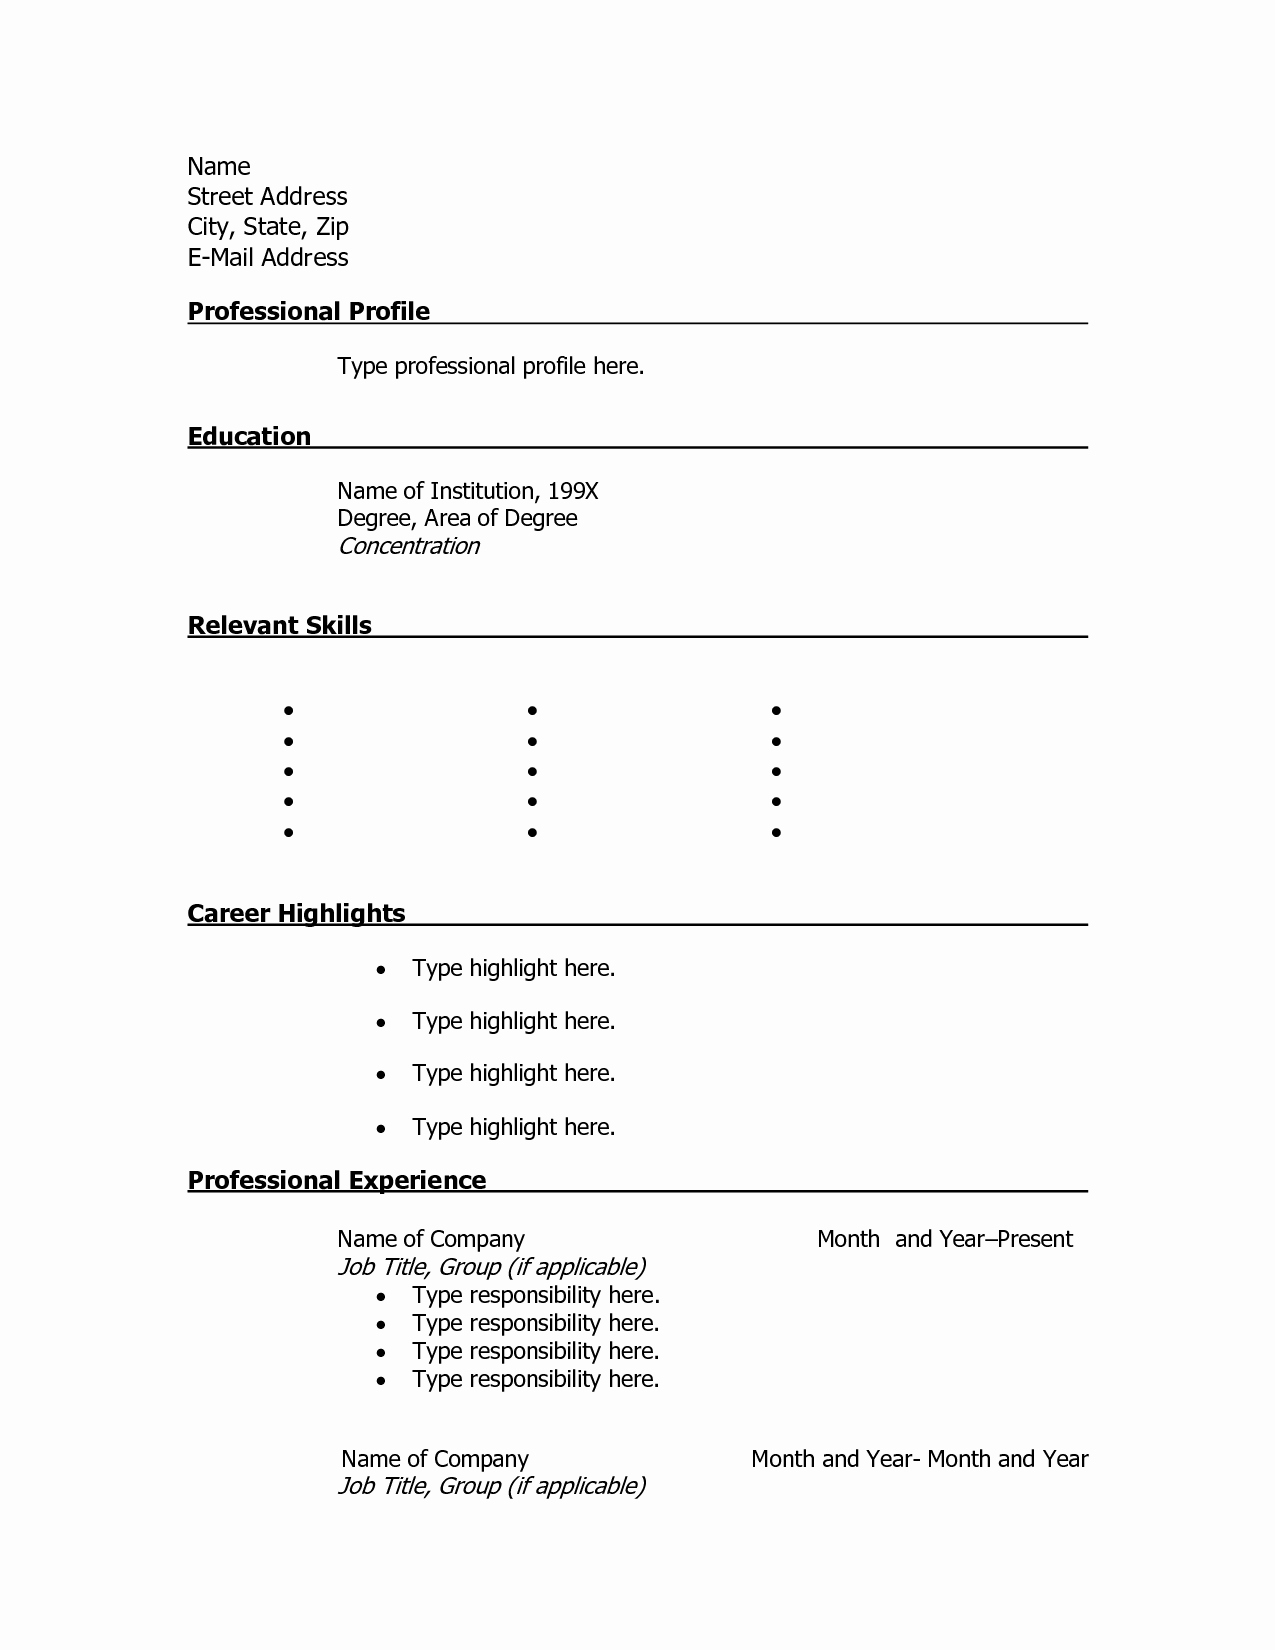 Blank Resume Templates For Microsoft Word Then Free Printable Resume - Free Printable Resume Templates Microsoft Word